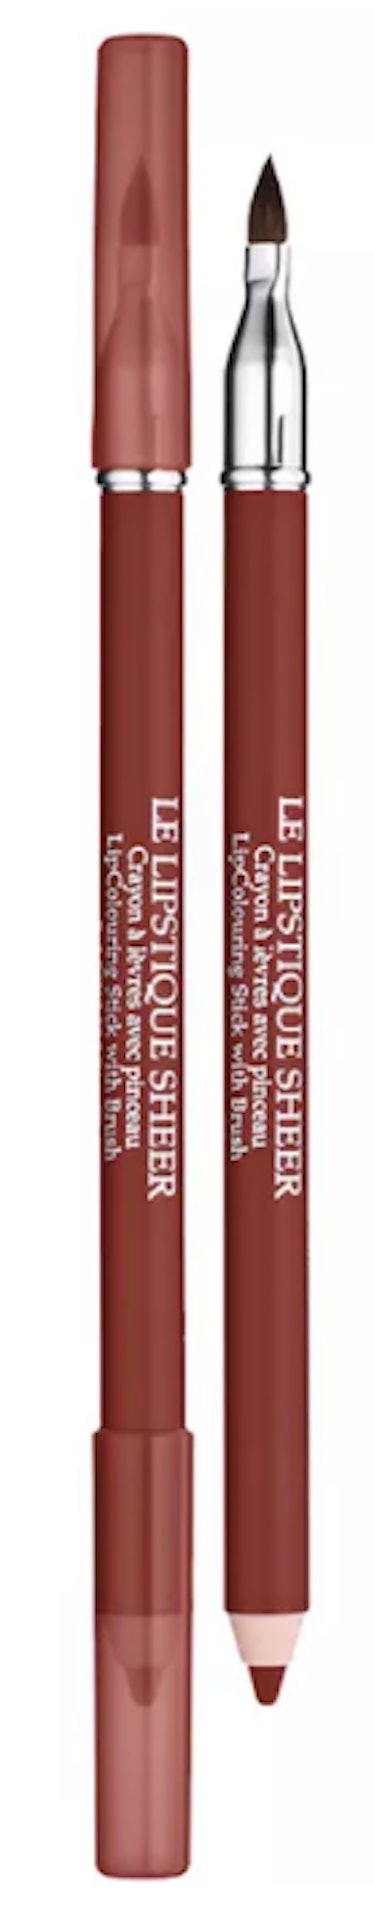 Le Lipstique Dual-Ended Lip Pencil With Brush